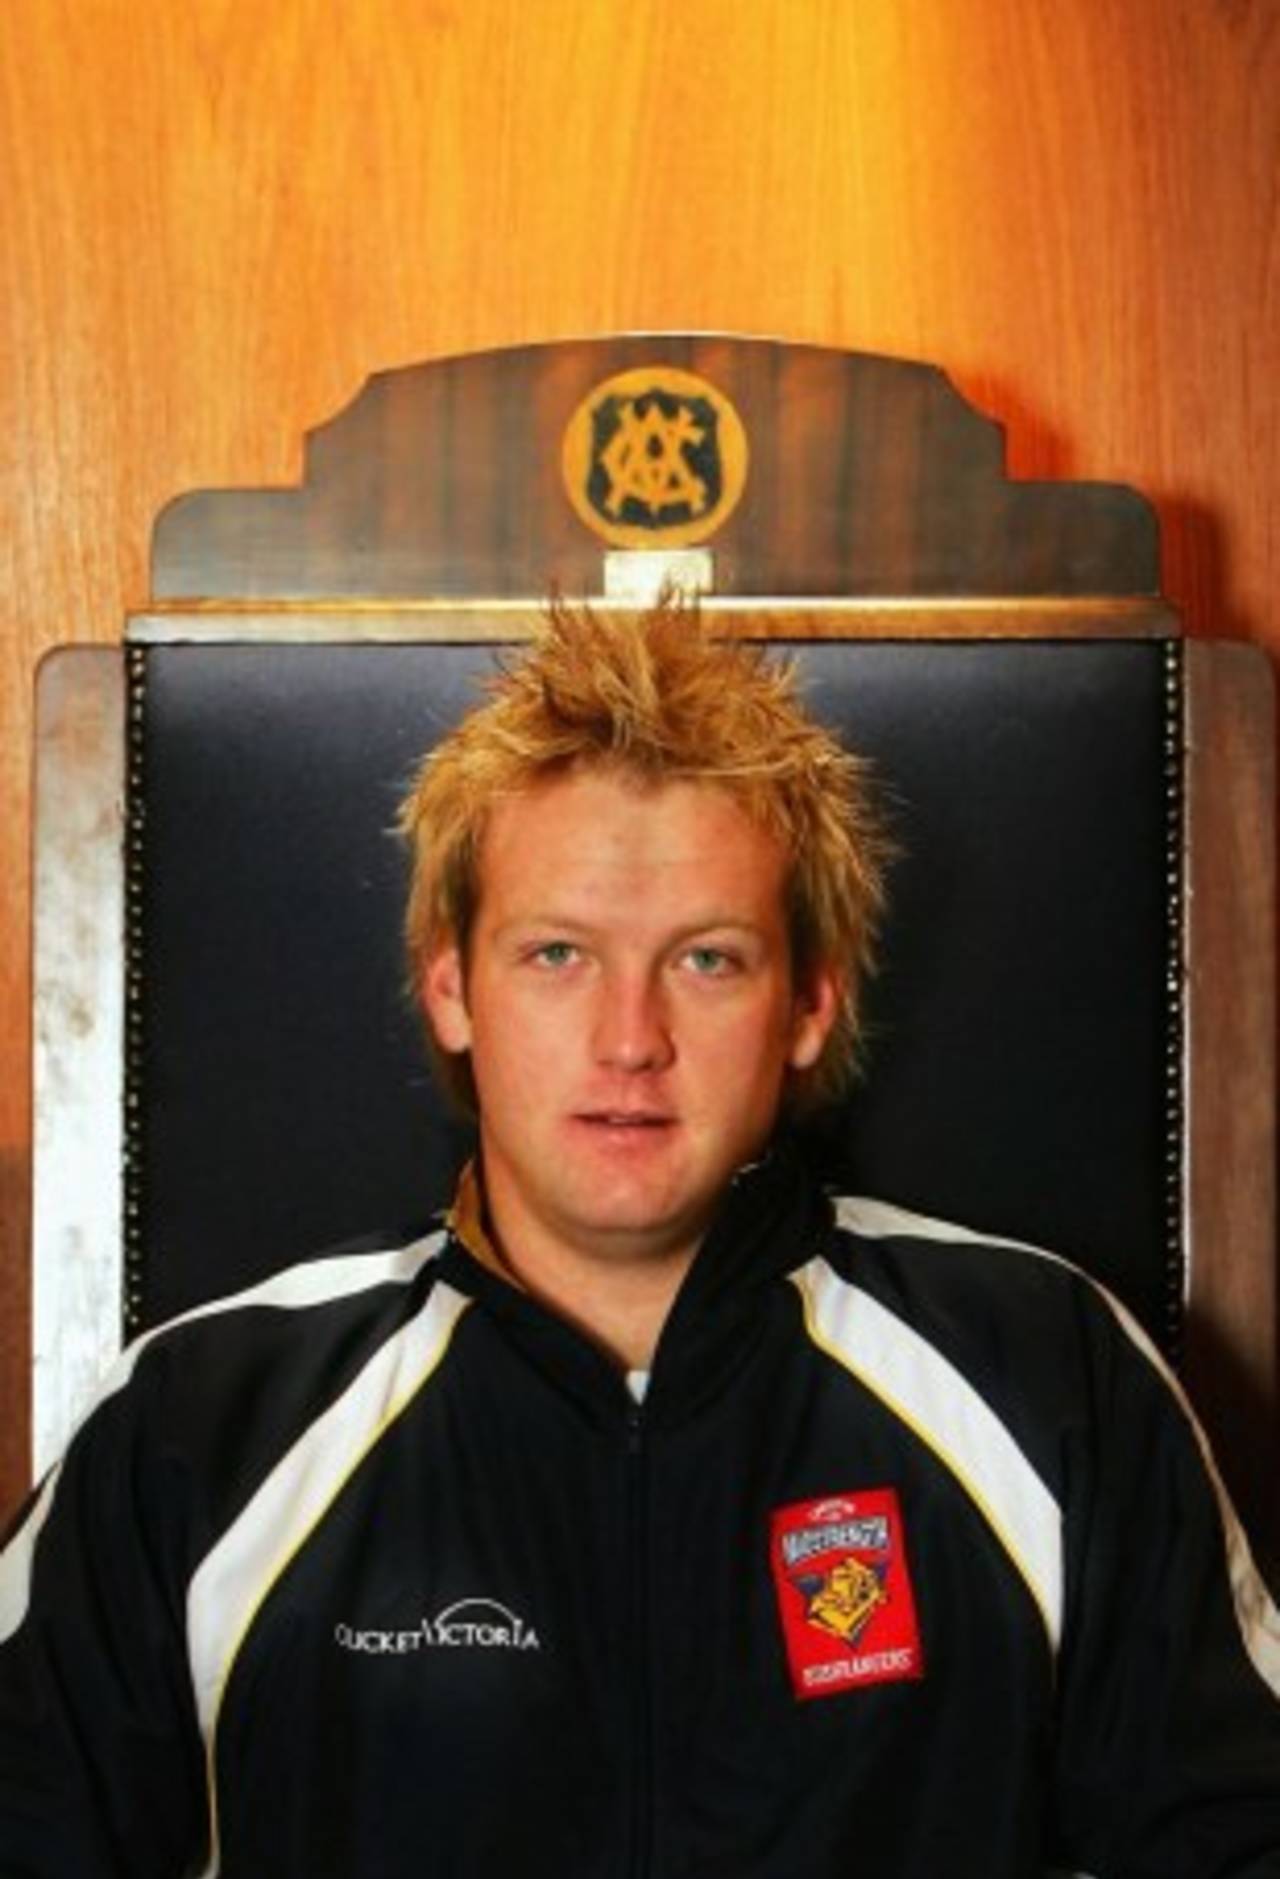 Cameron White poses at the announcement that he was to become Victoria's captain, Melbourne, July 14, 2004